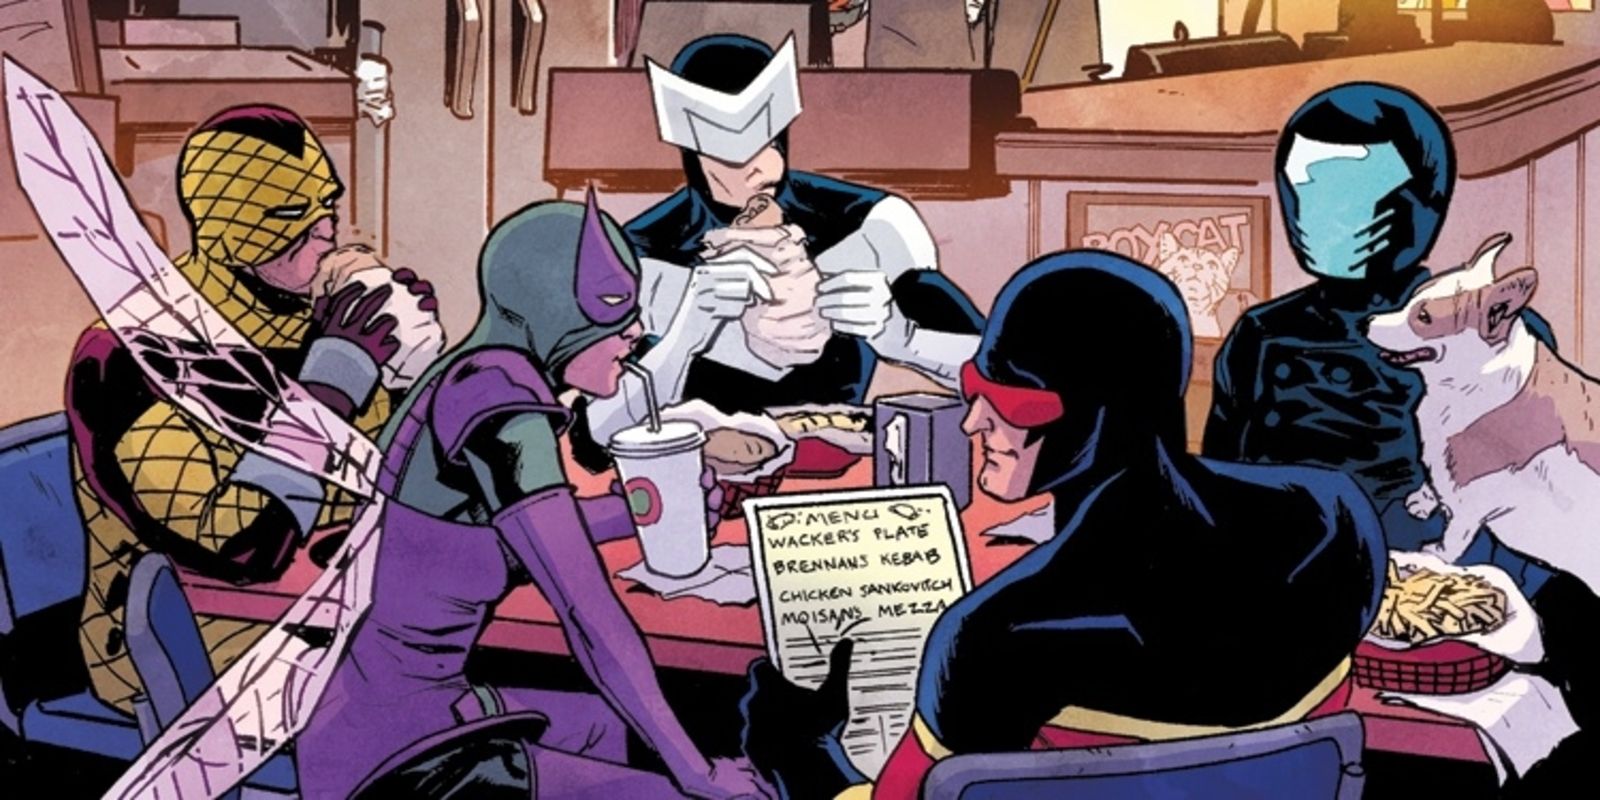 The Superior Foes of Spider-Man playing poker